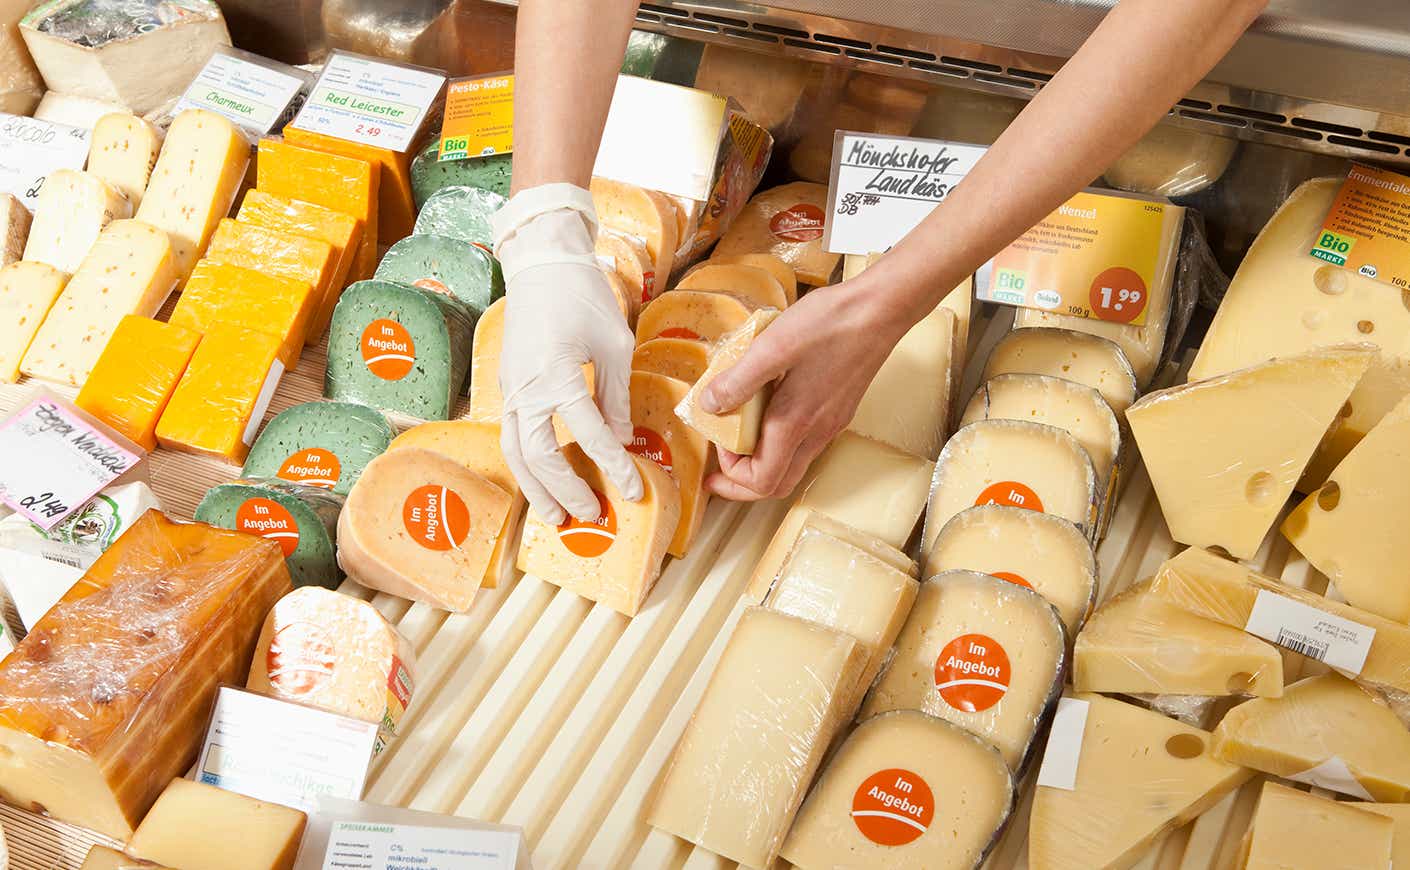 Hands reaching for cheese at deli counter